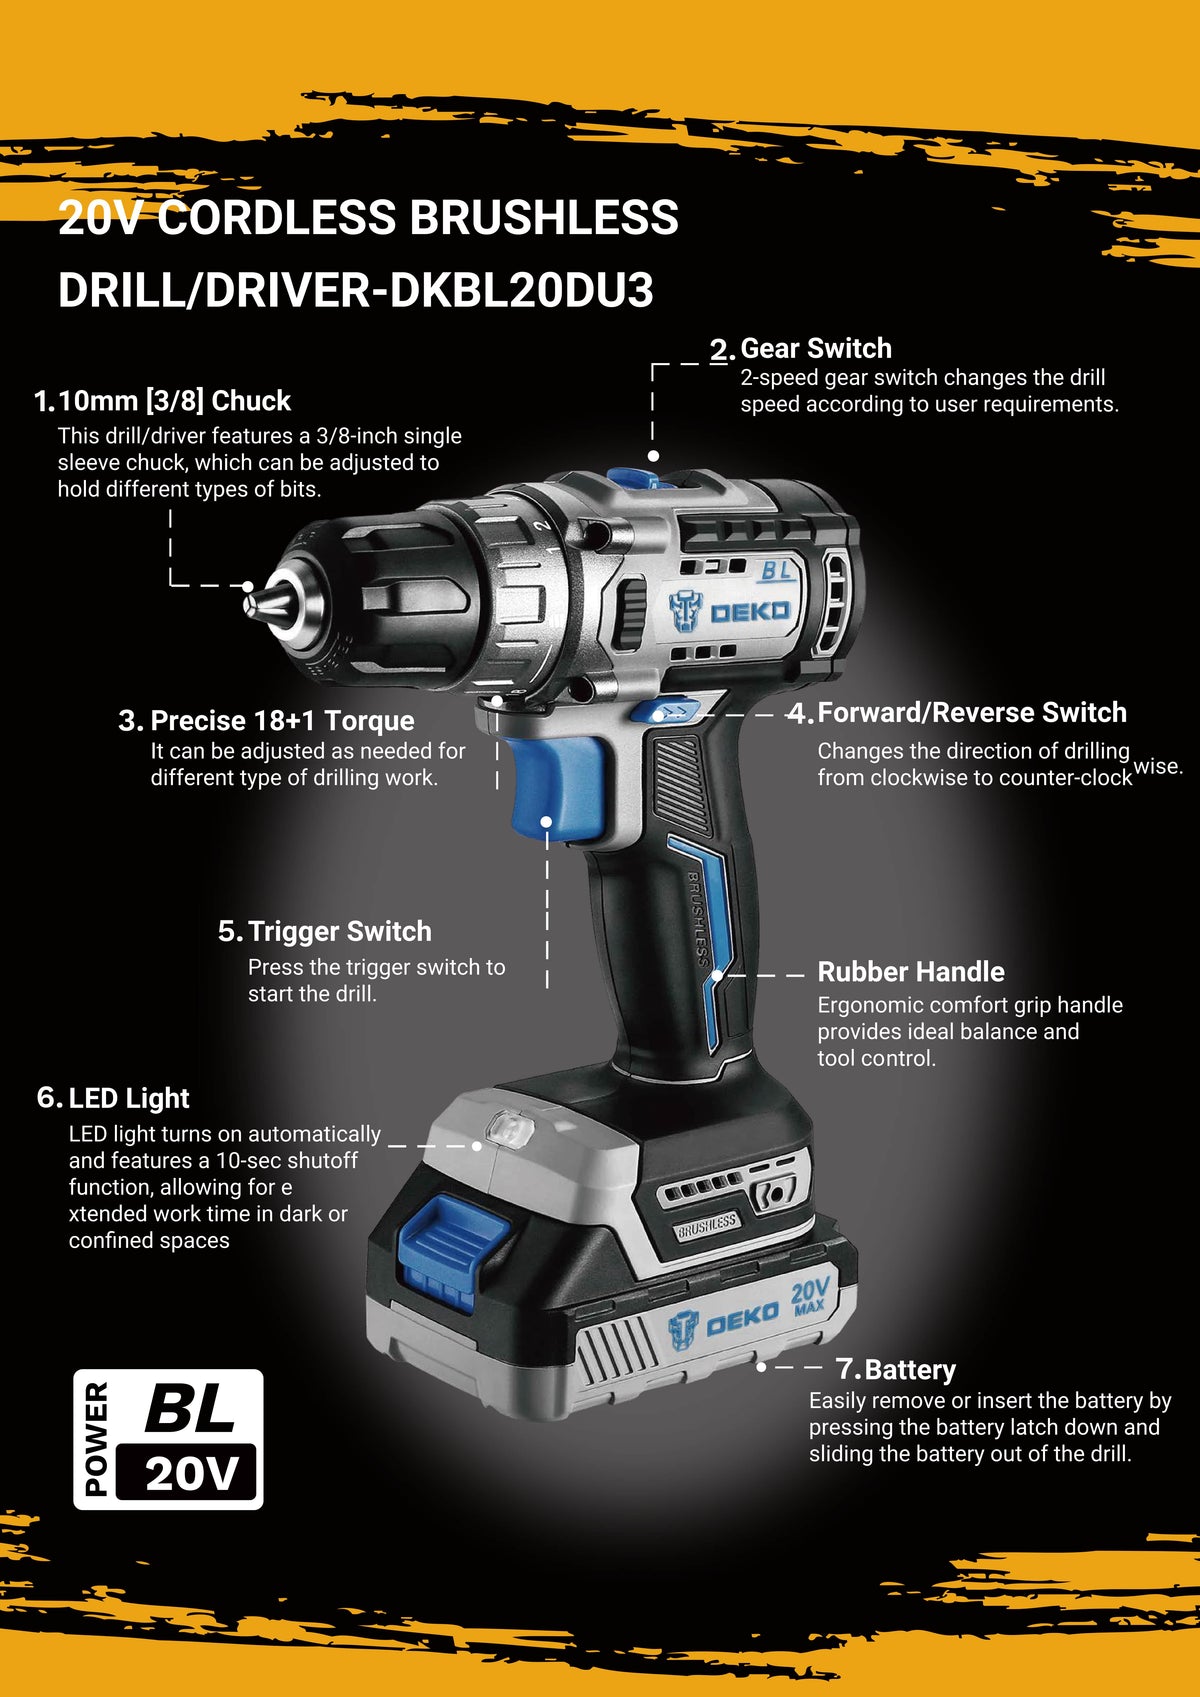 Hammer Drill Vs Drill: What's the Difference?